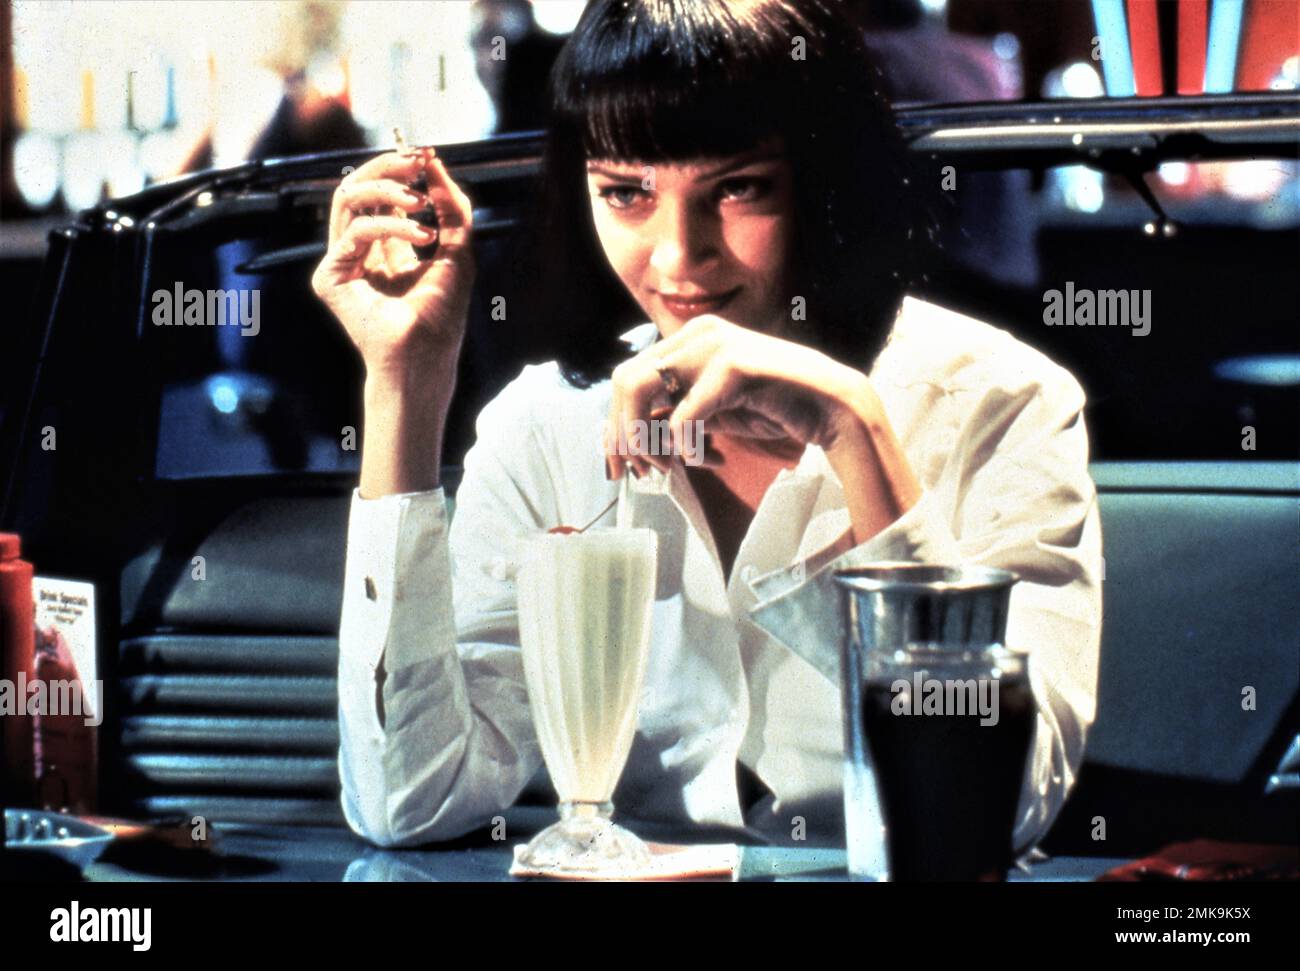 UMA THURMAN in PULP FICTION 1994 director / writer QUENTIN TARANTINO stories Quentin Tarantino and Roger Avary costume design Betsy Heimann producer Lawrence Bender A Band Apart / Jersey Pictures / Miramax (USA) - Buena Vista International (UK) Stock Photo